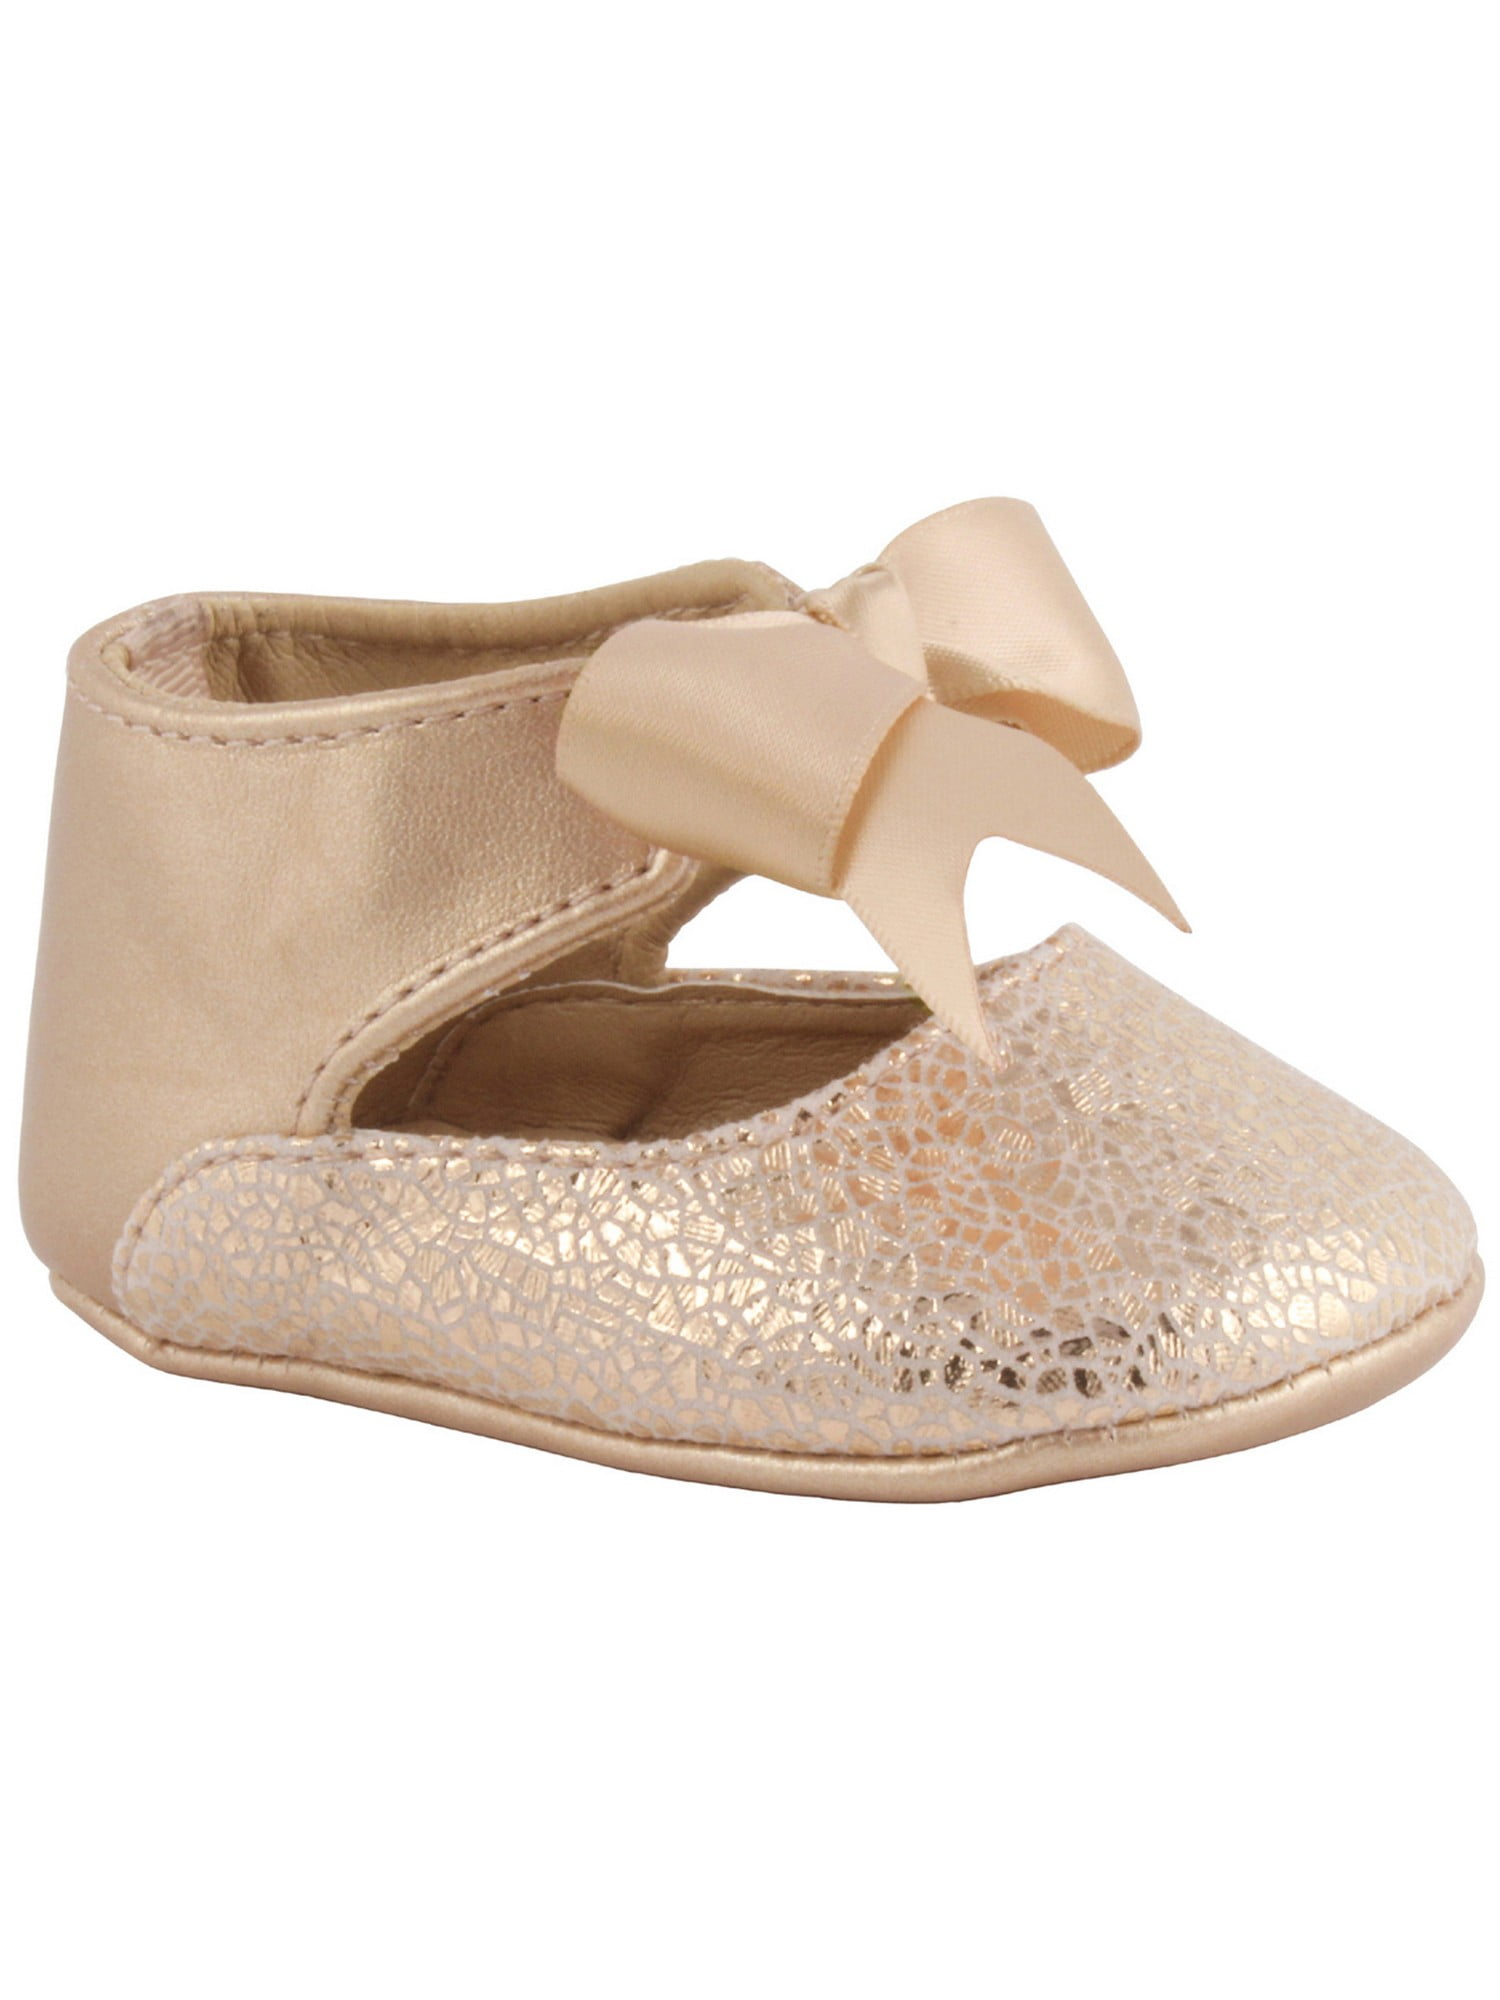 rose gold shoes for baby girl